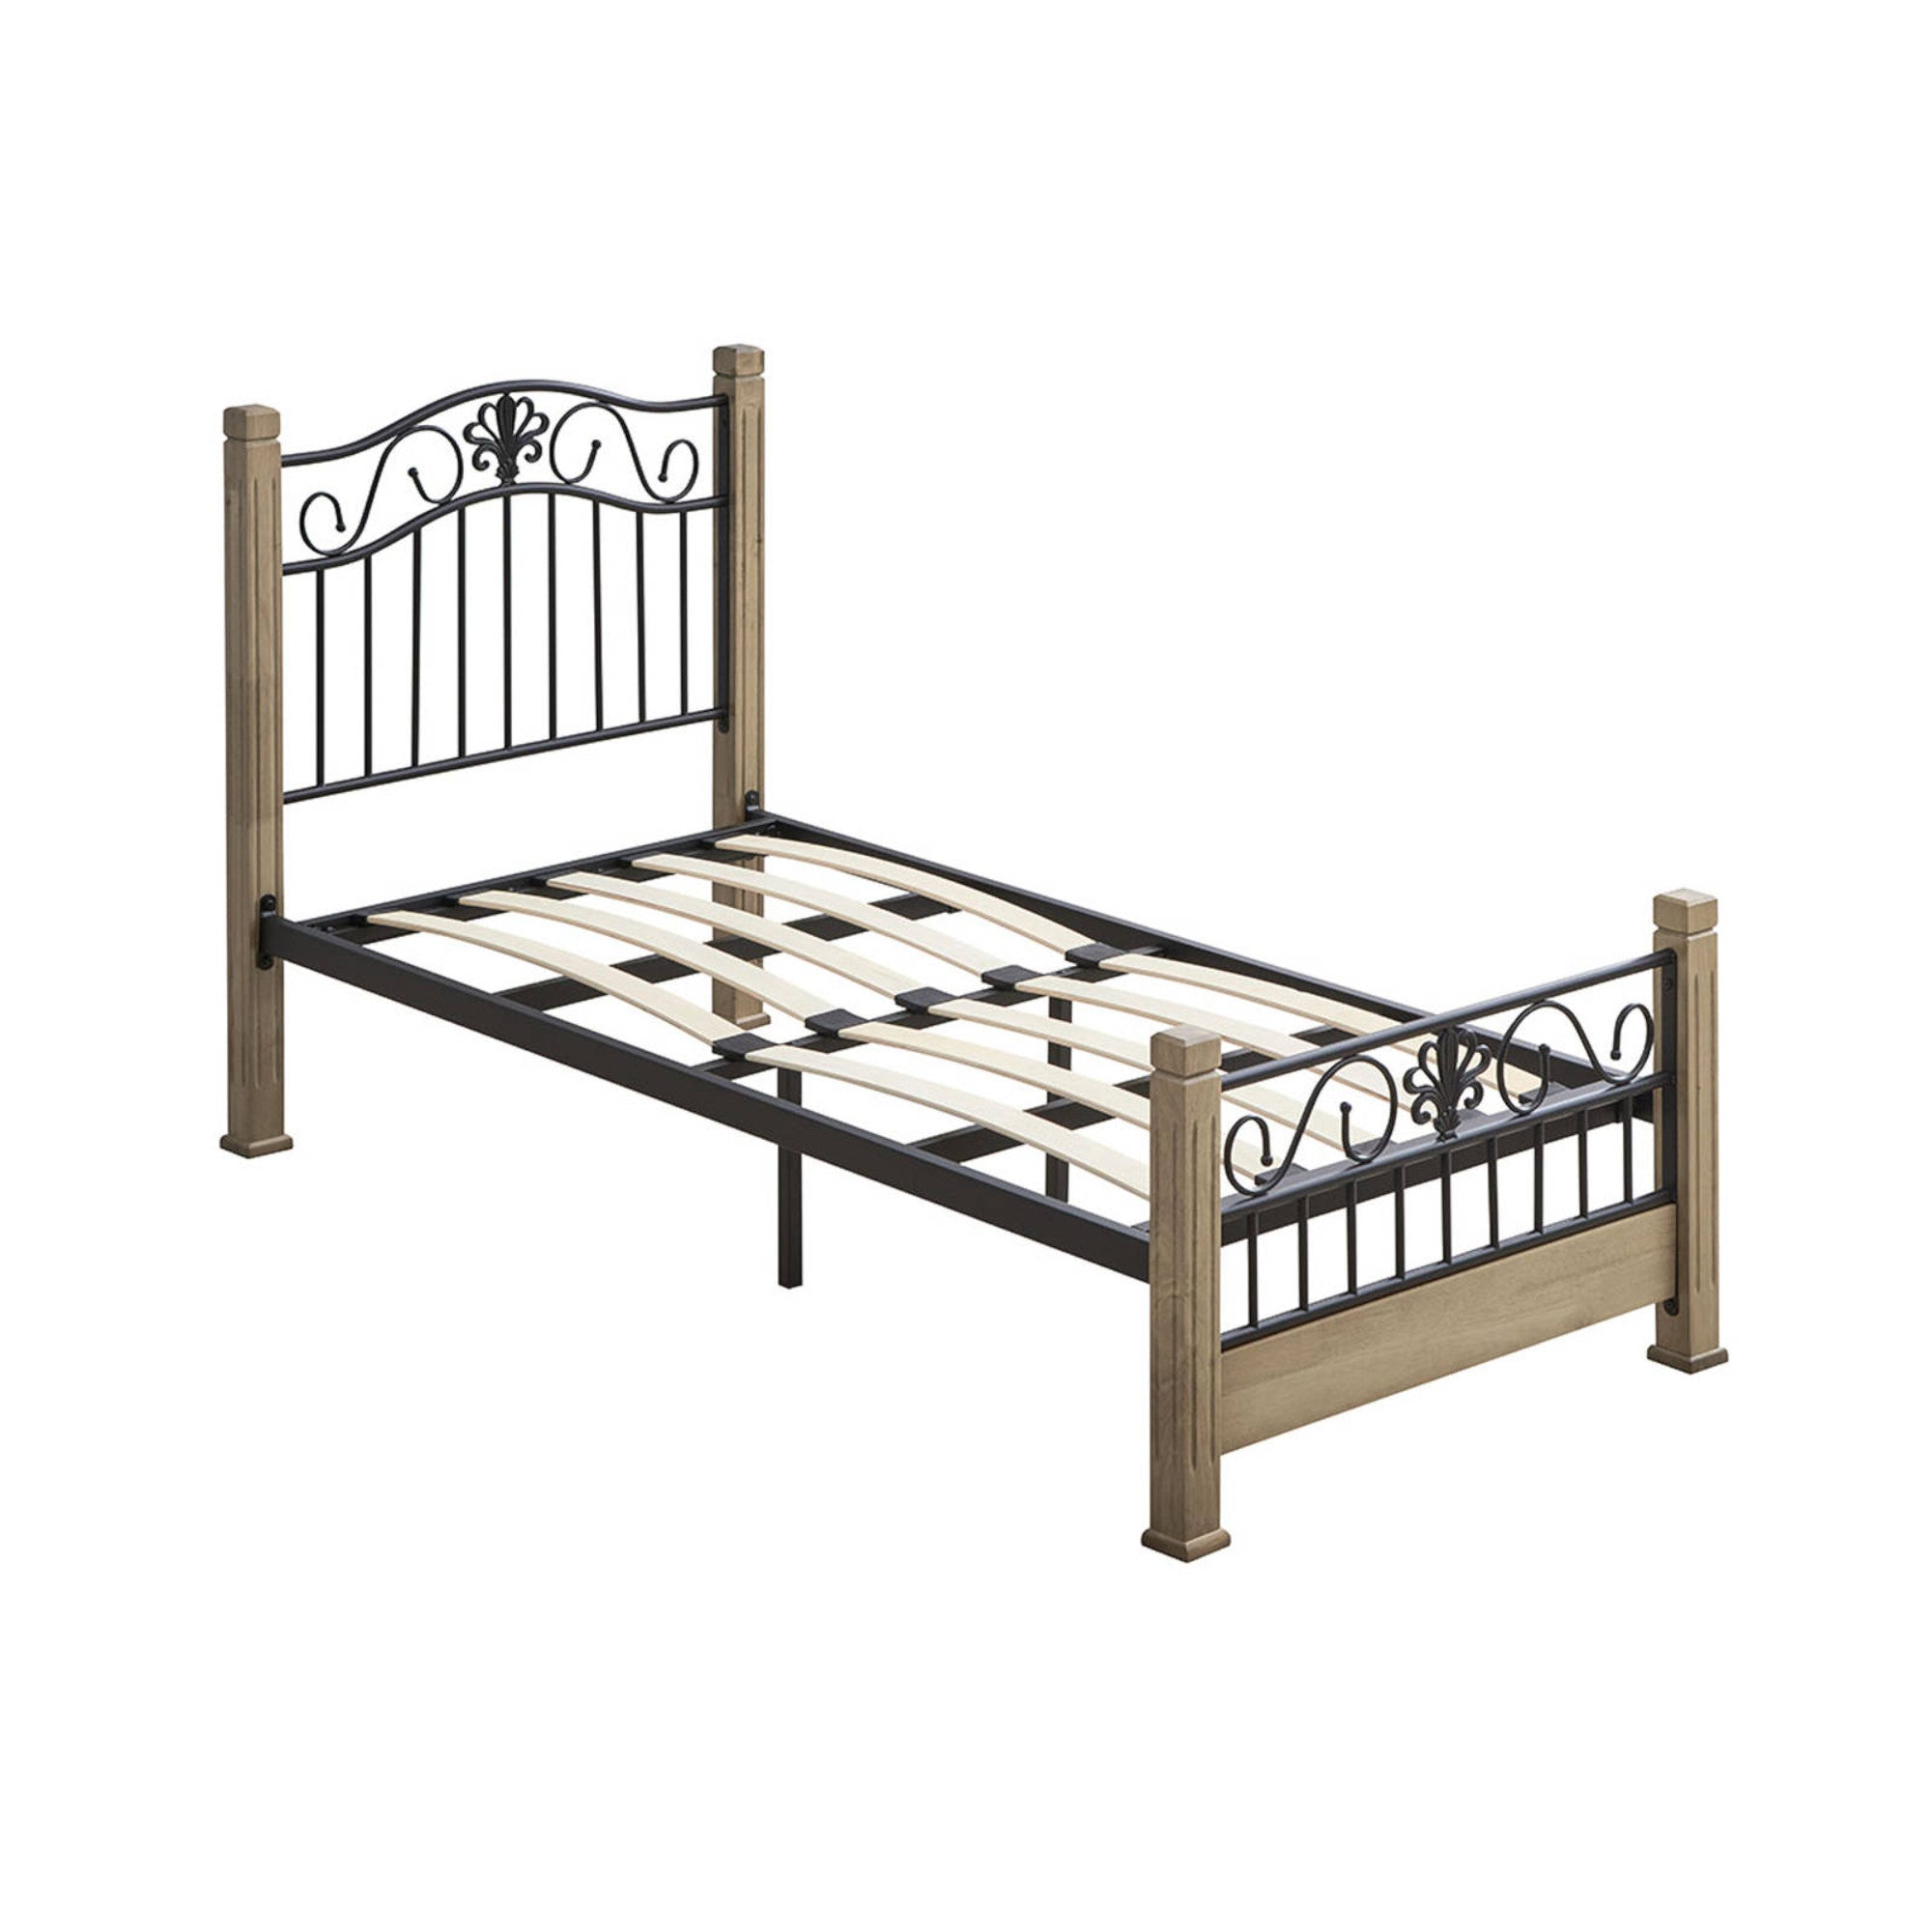 Christine Wood & Metal Bed Frame - Maple and Black